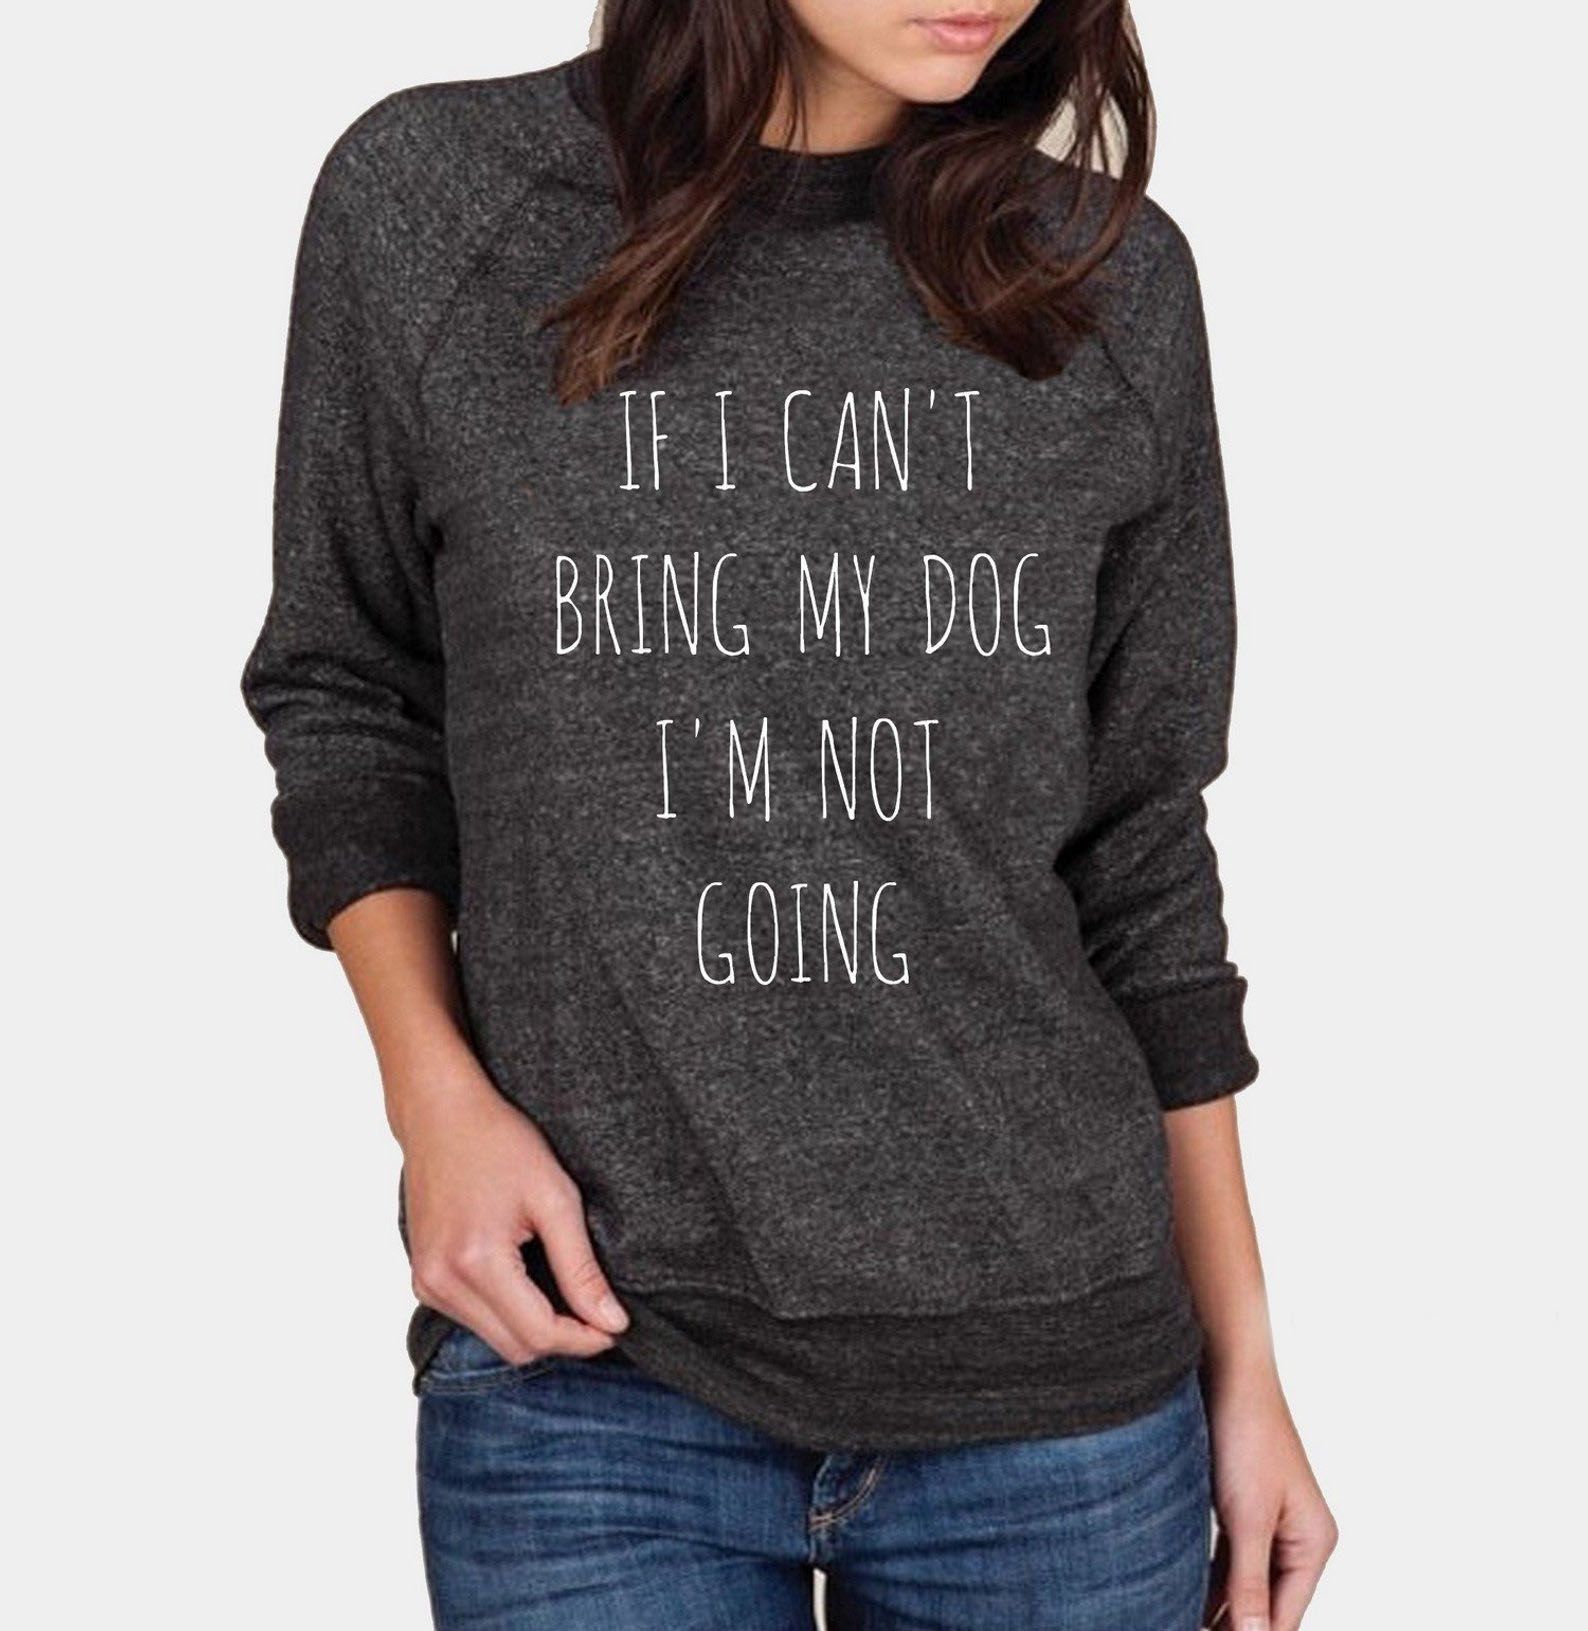 Dog Mama sweater shirt pet and animal graphic shirt Perfect gift for Dog lovers